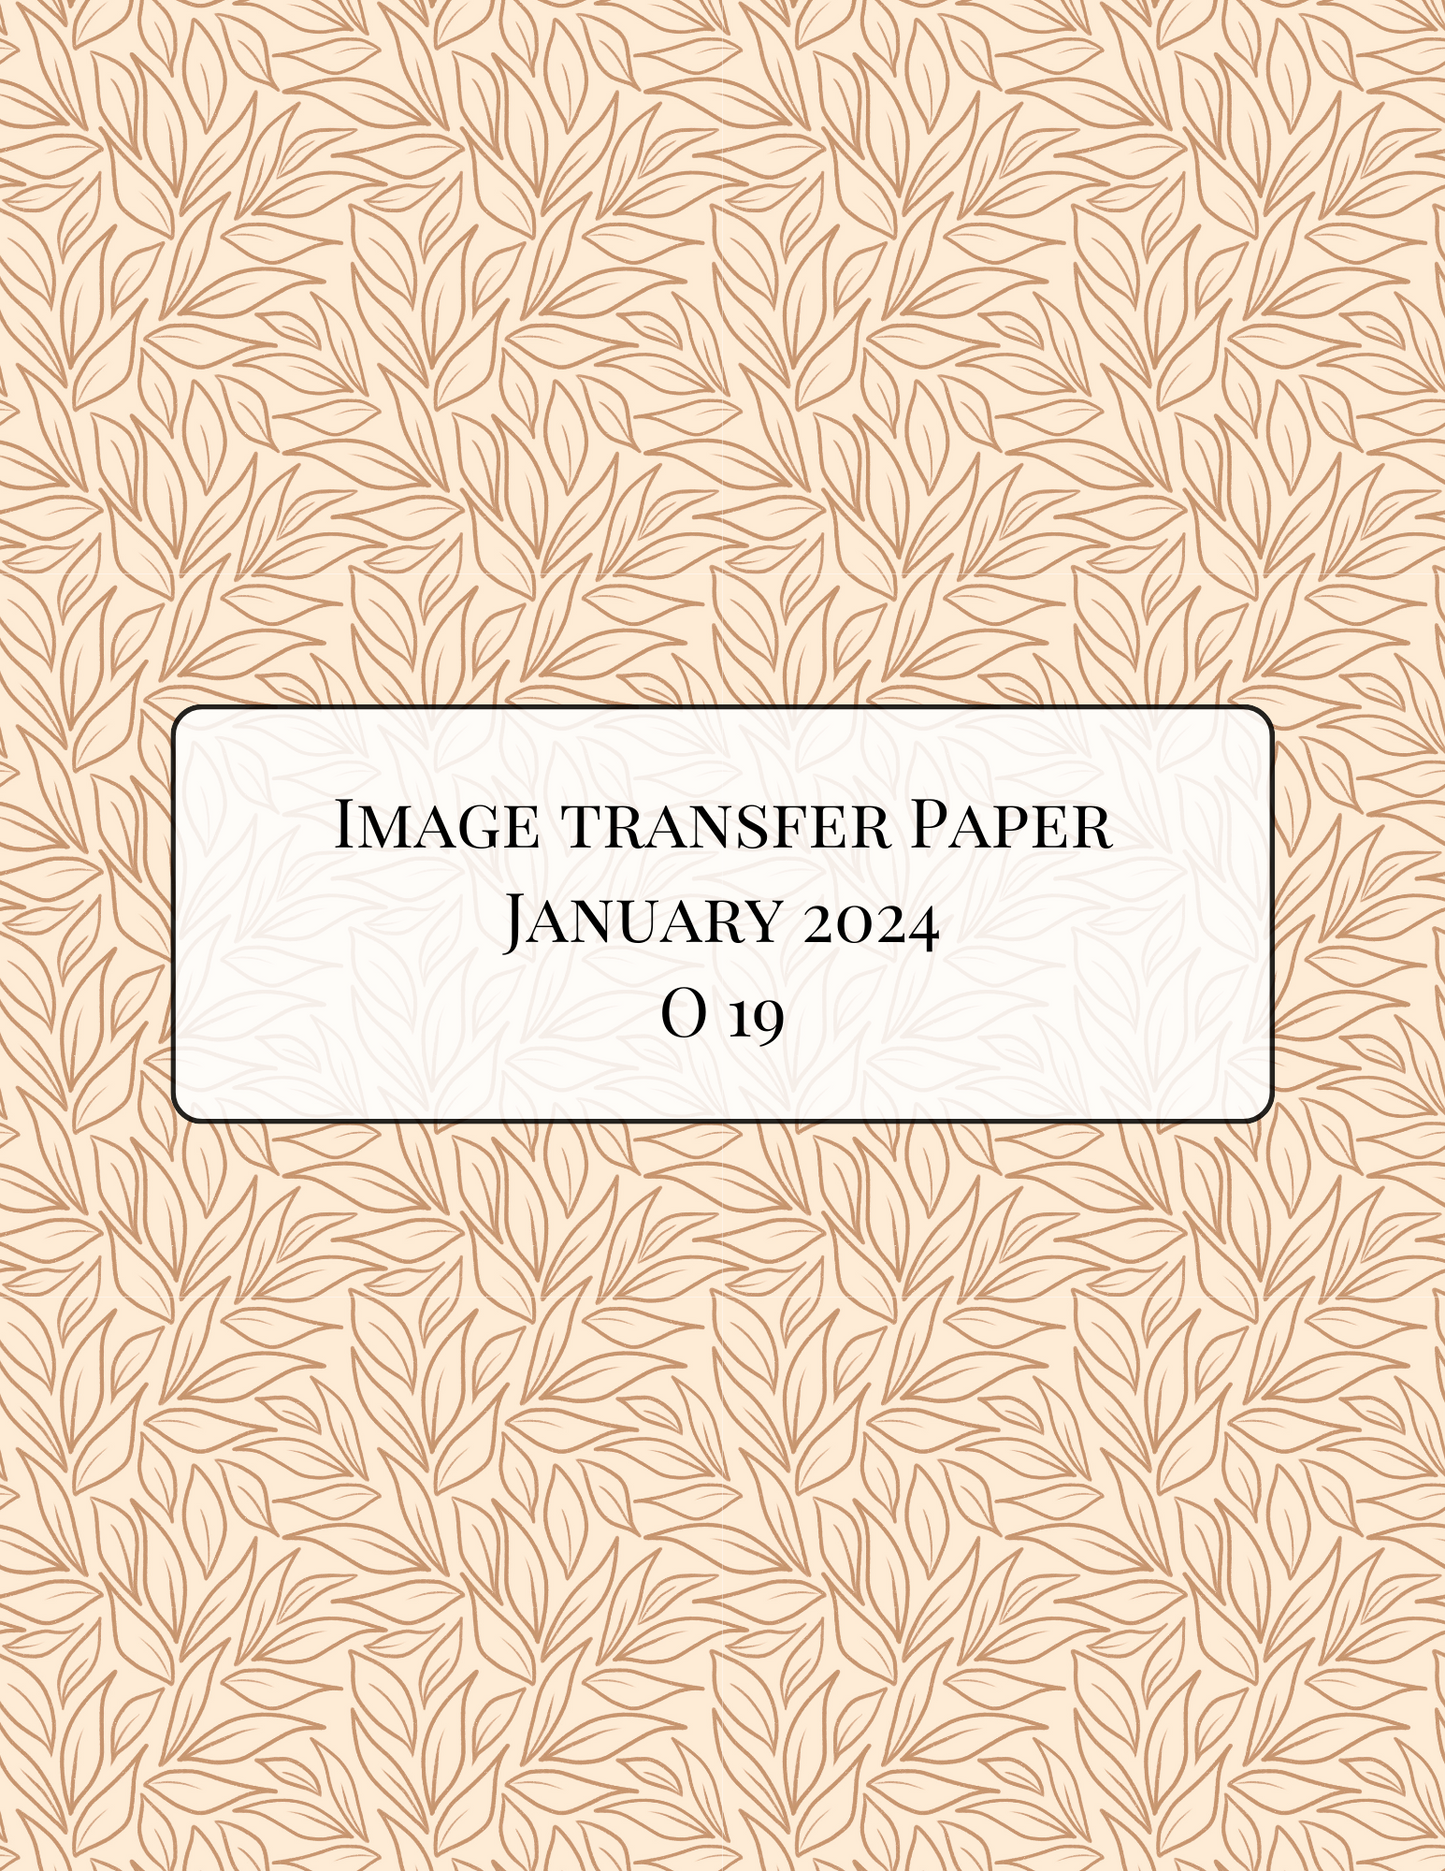 O19 Transfer Paper - January Launch